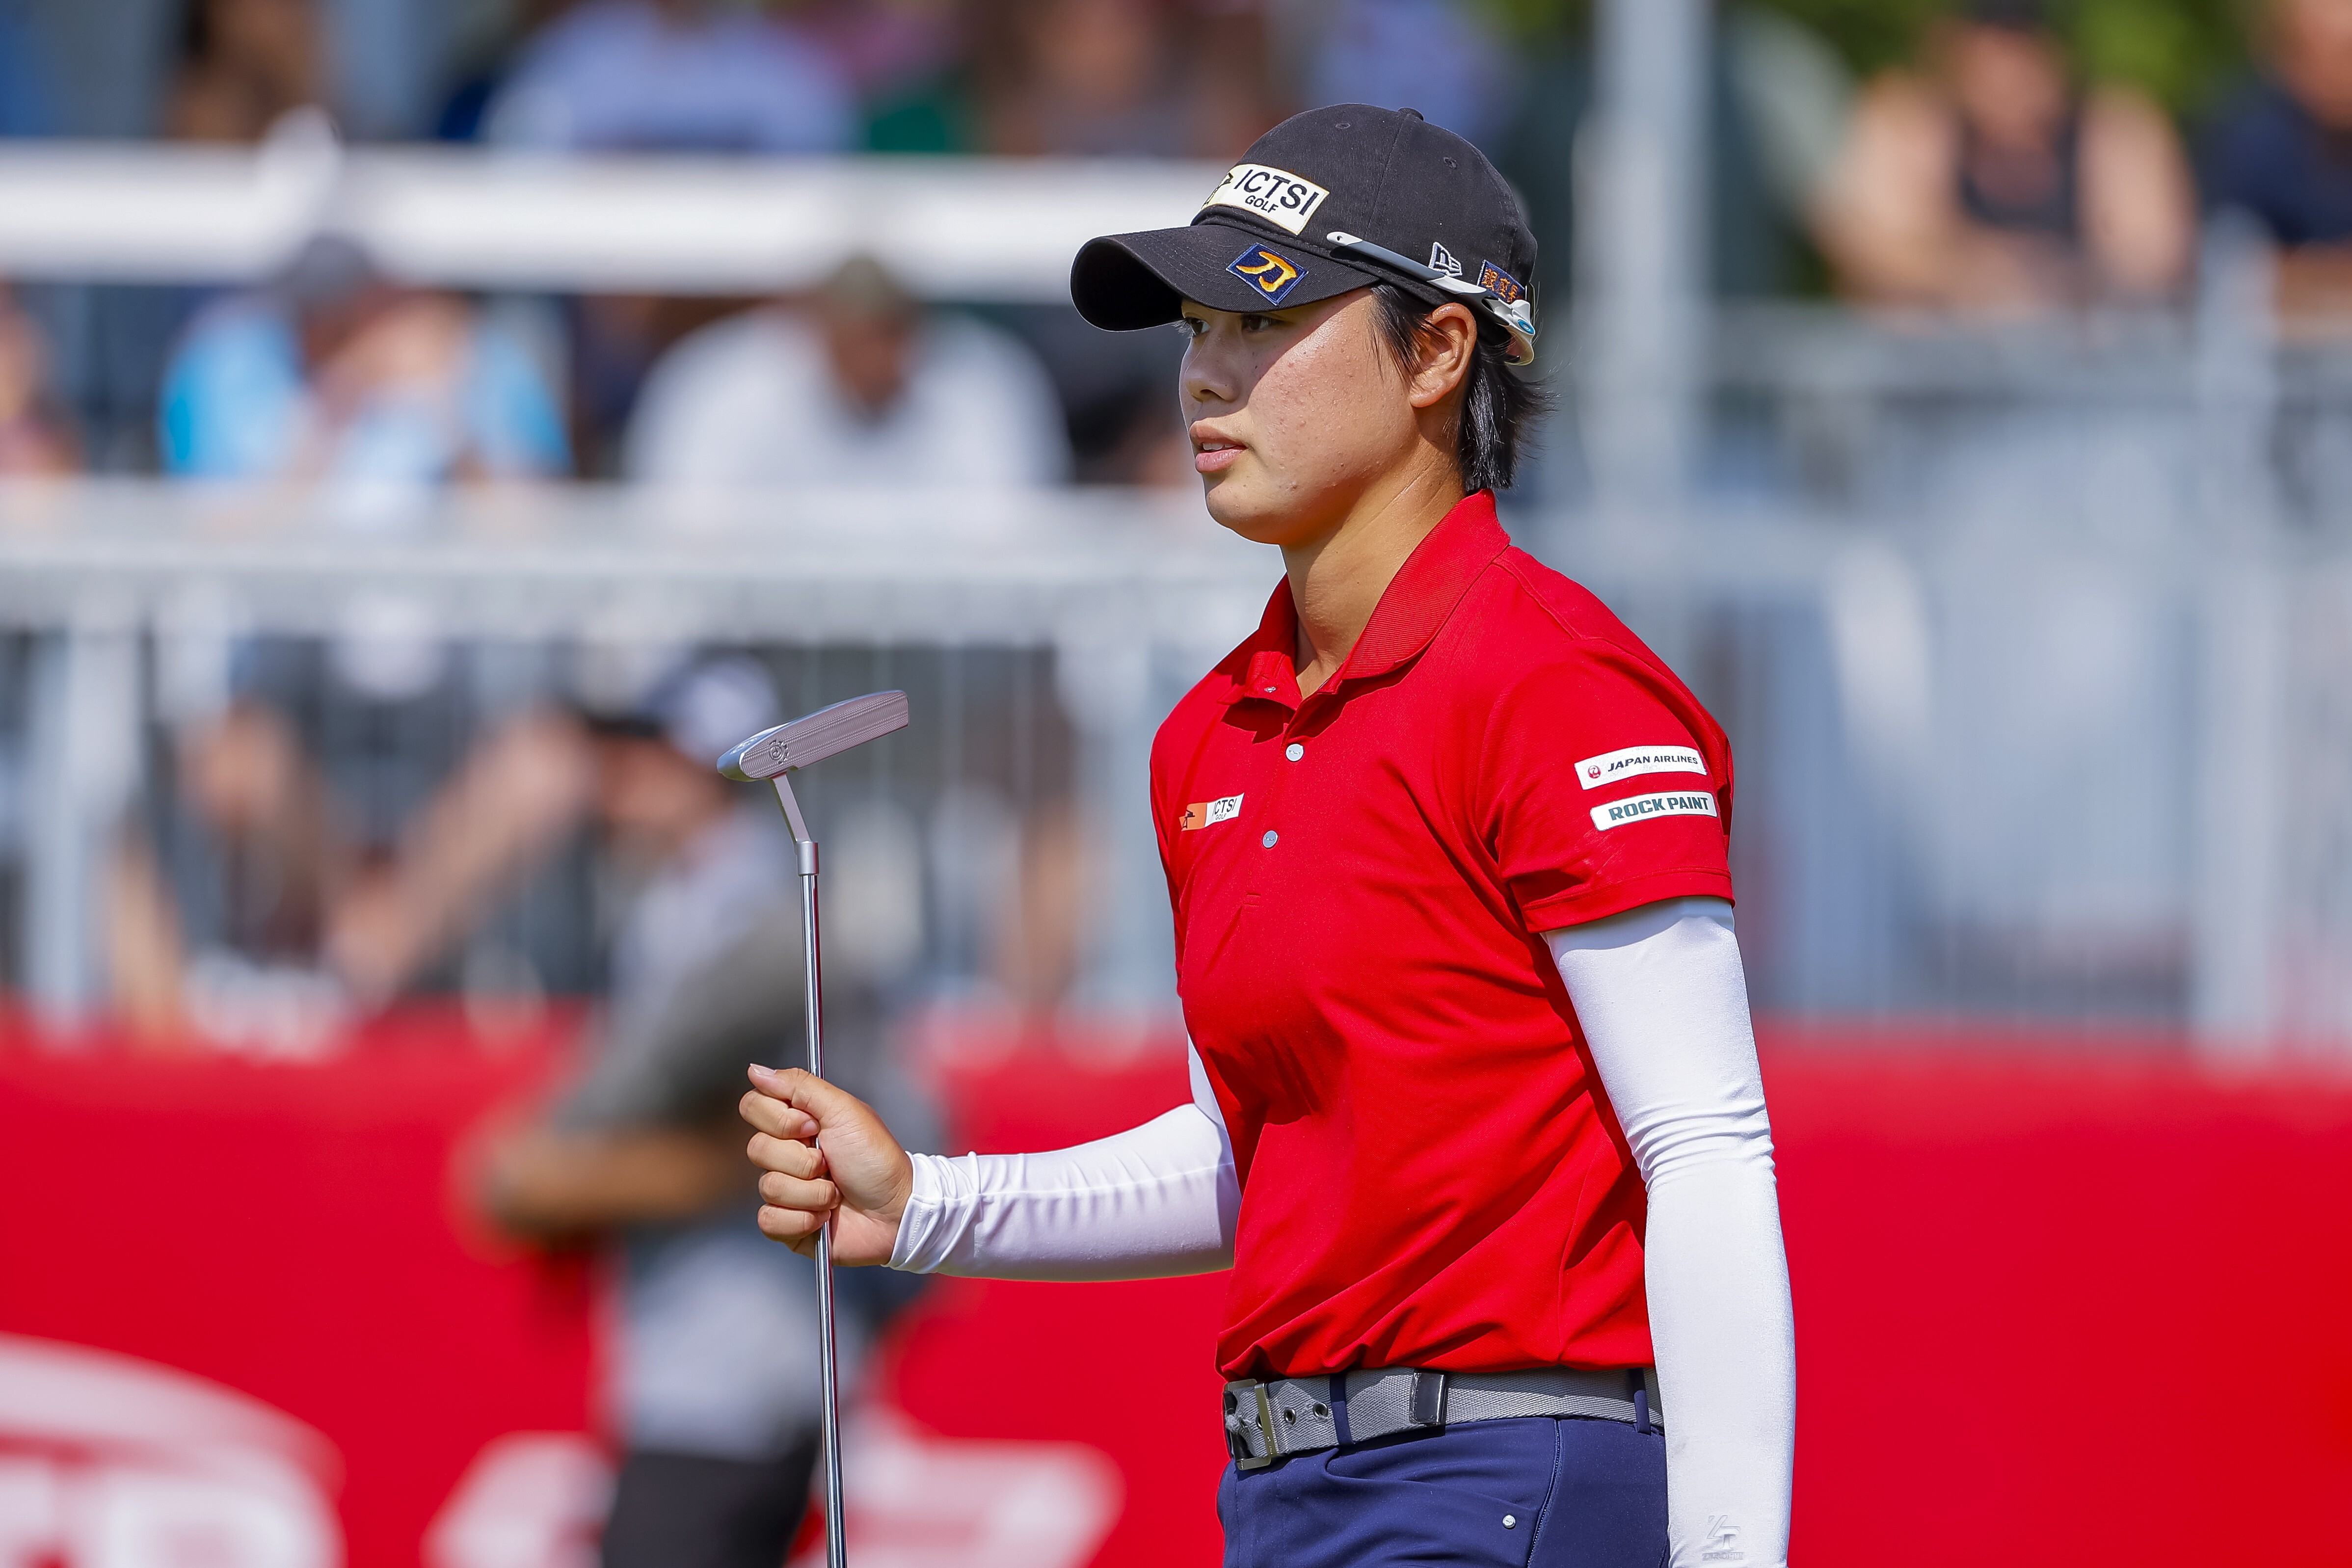 Yuka Saso of the Philippines in action on the LPGA Tour. The 2018 Asian Games gold medallist has said that will choose Japanese citizenship. Photo: EPA